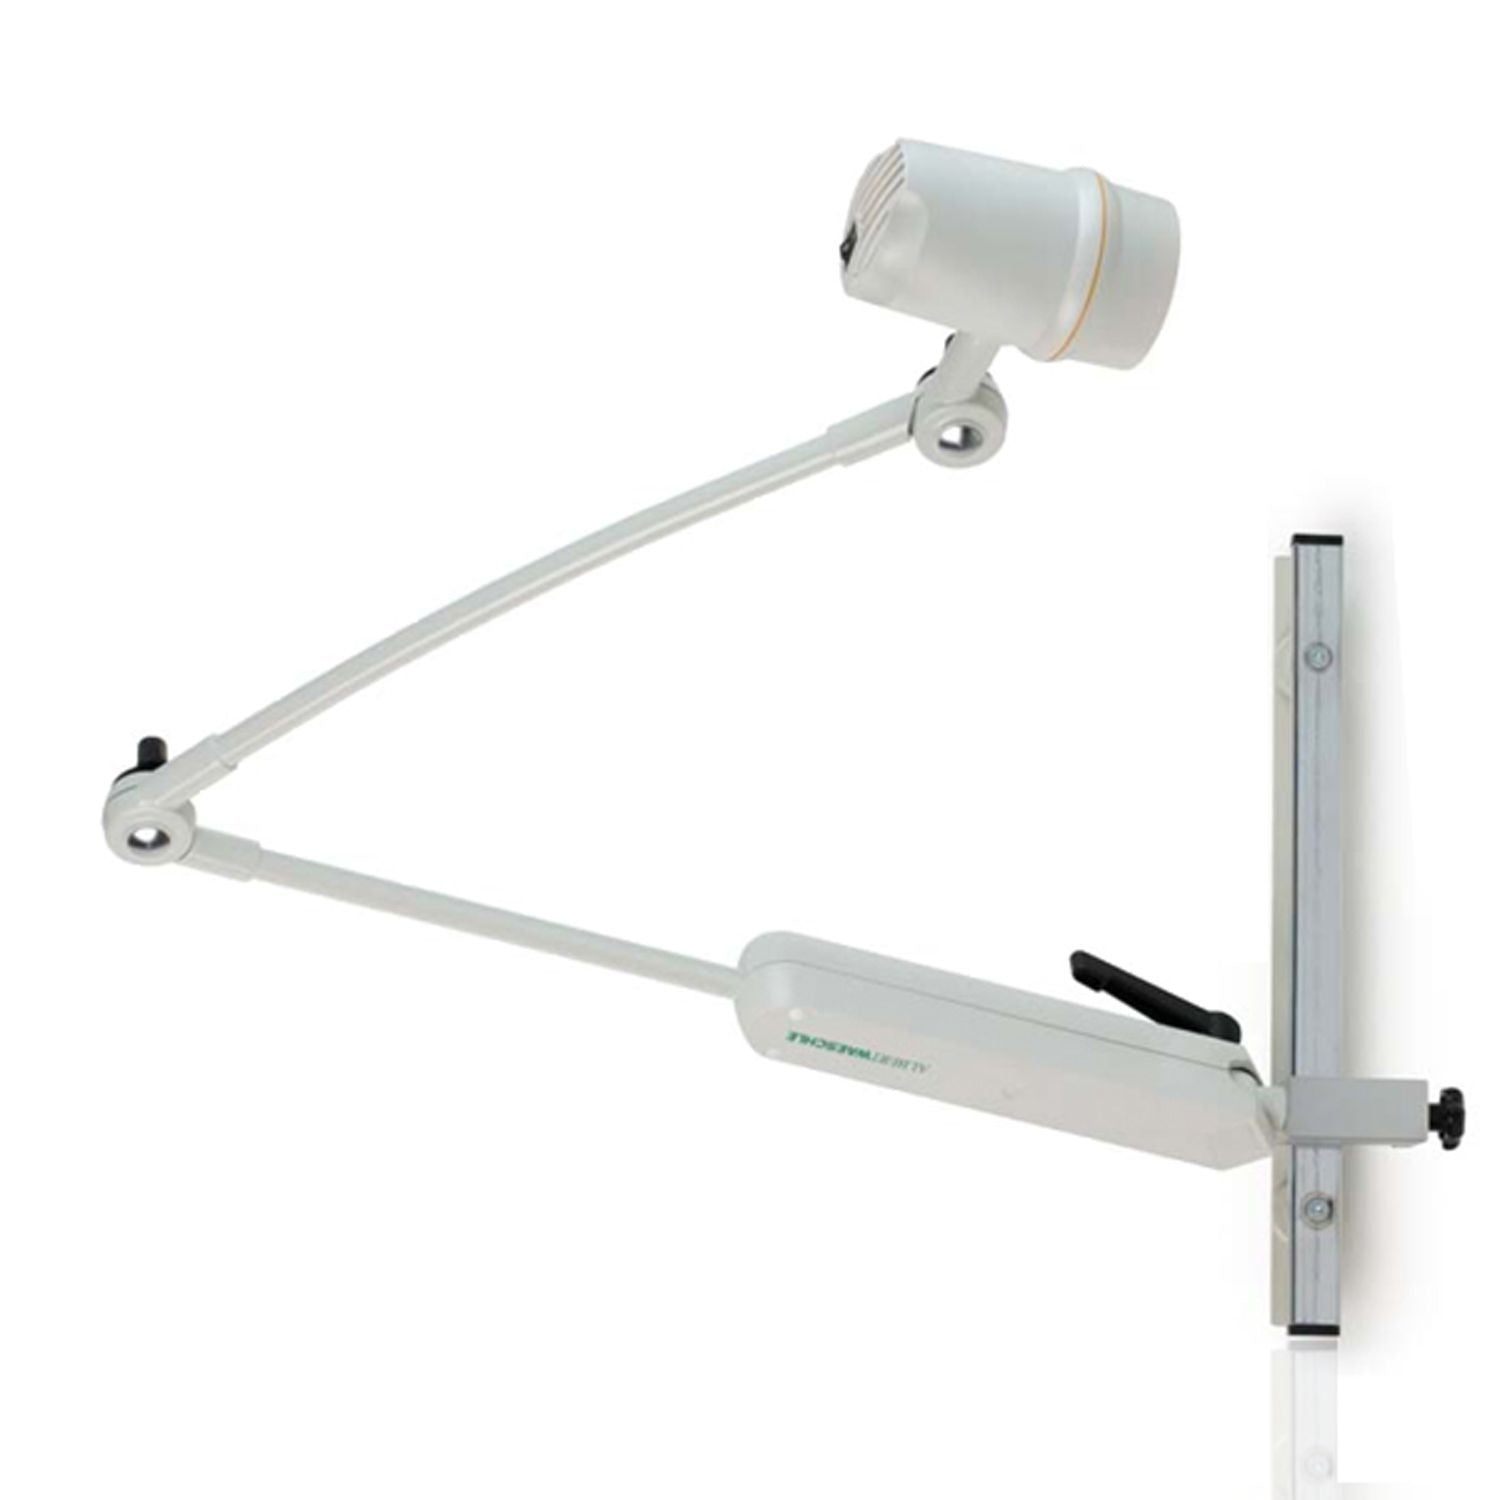 Rail Mount System | Brackets and Sliding Clamp | 50cm Long